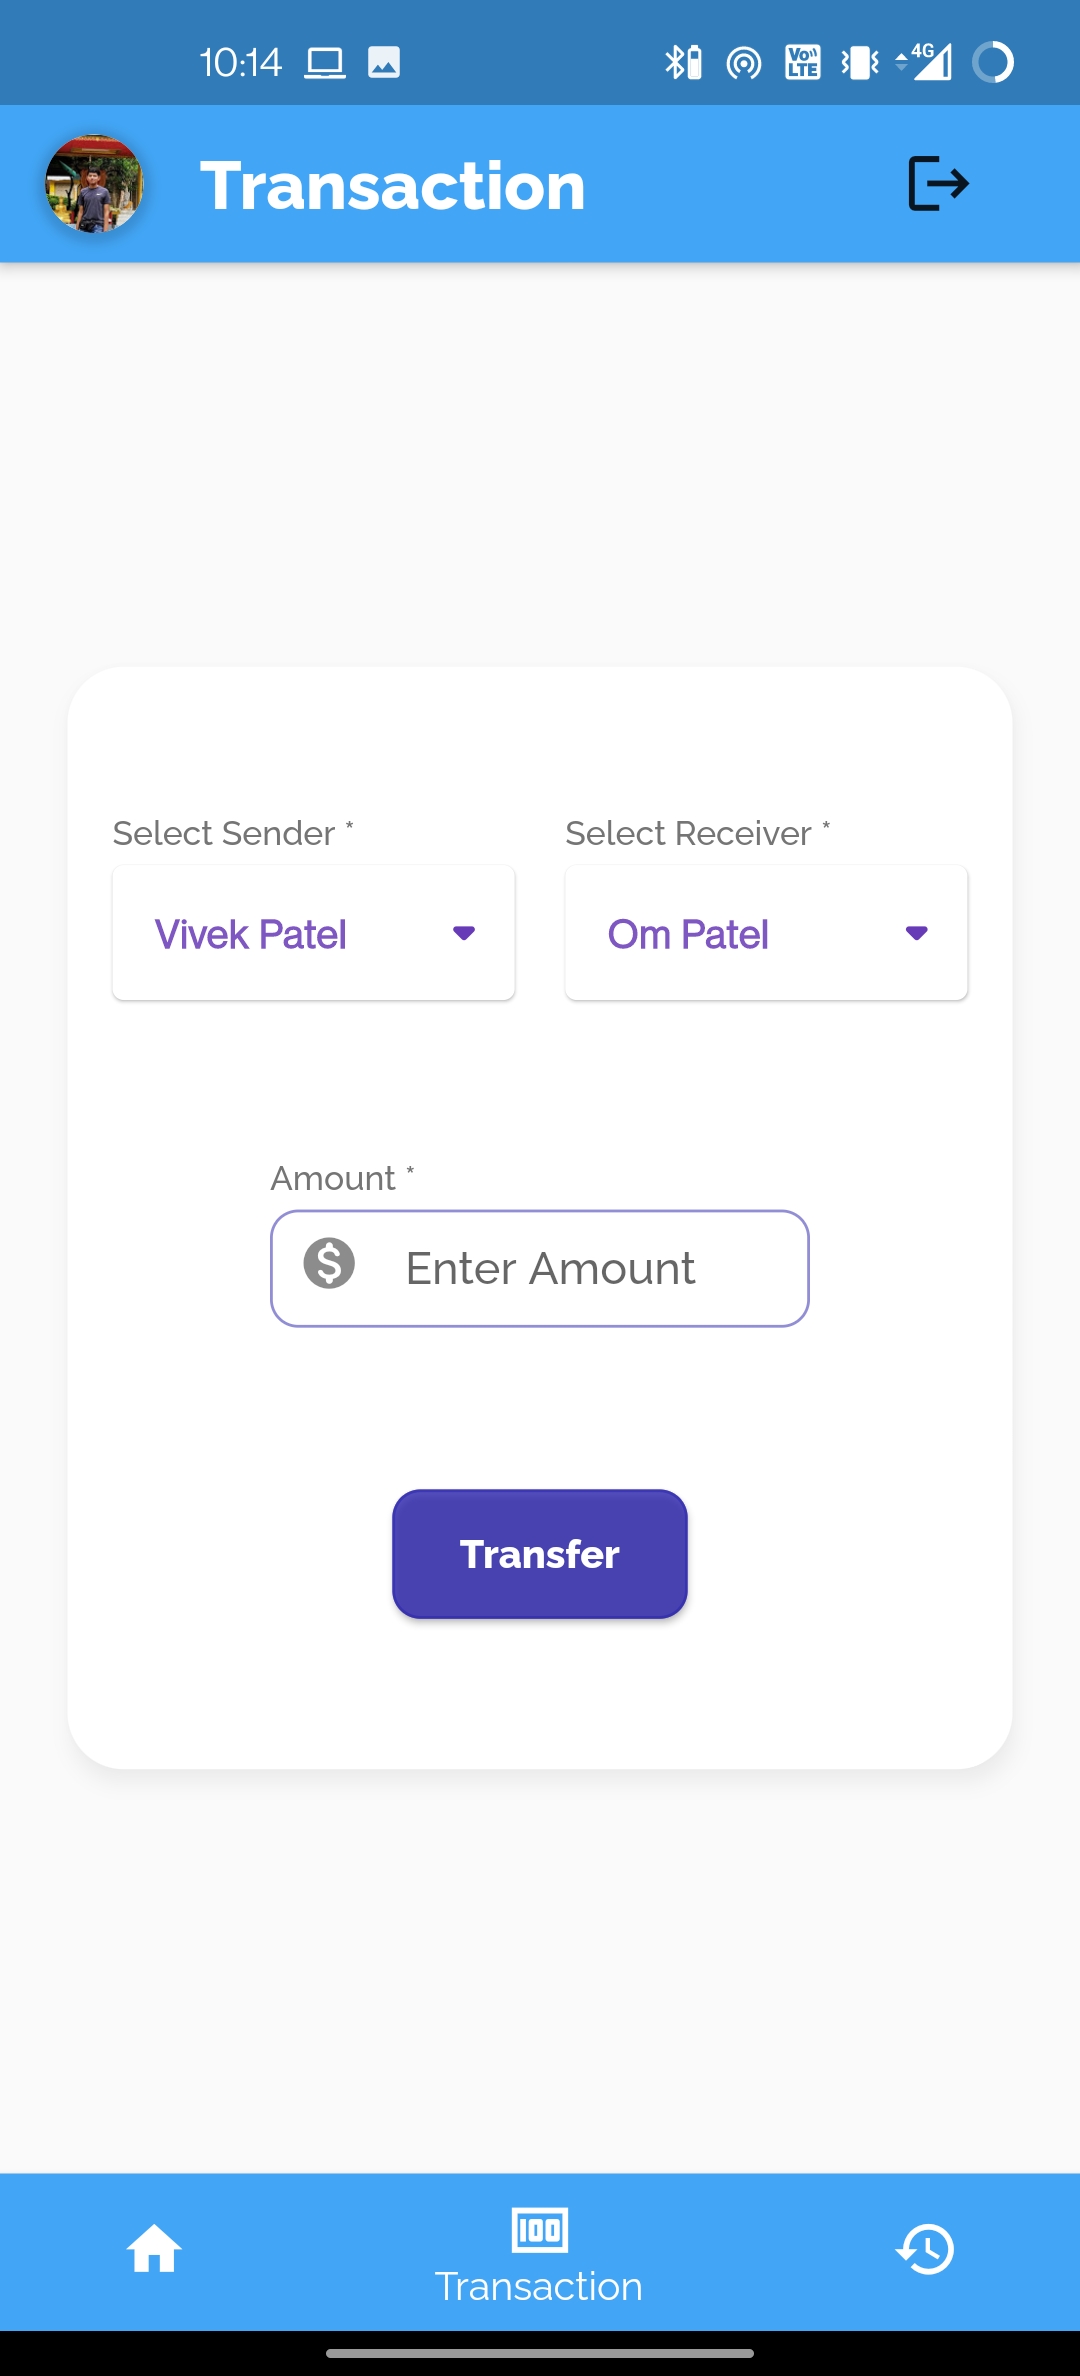 A Basic Banking Flutter App with the integration of Firebase